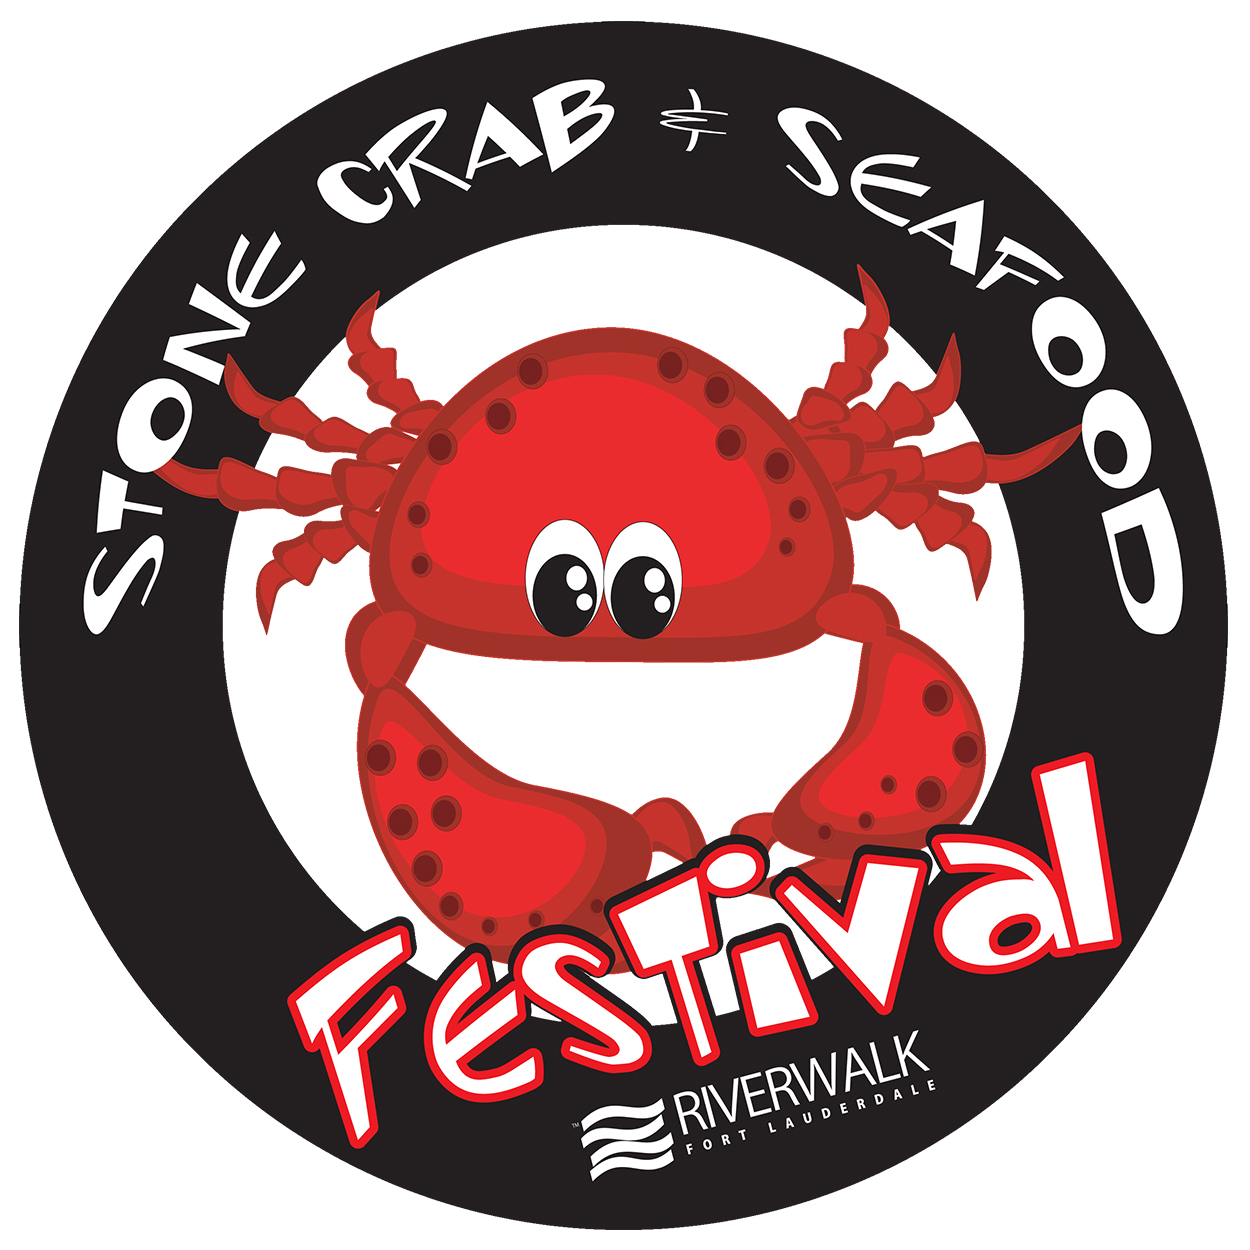 Riverwalk Stone Crab & Seafood Festival presented by Brimstone Woodfire Grill